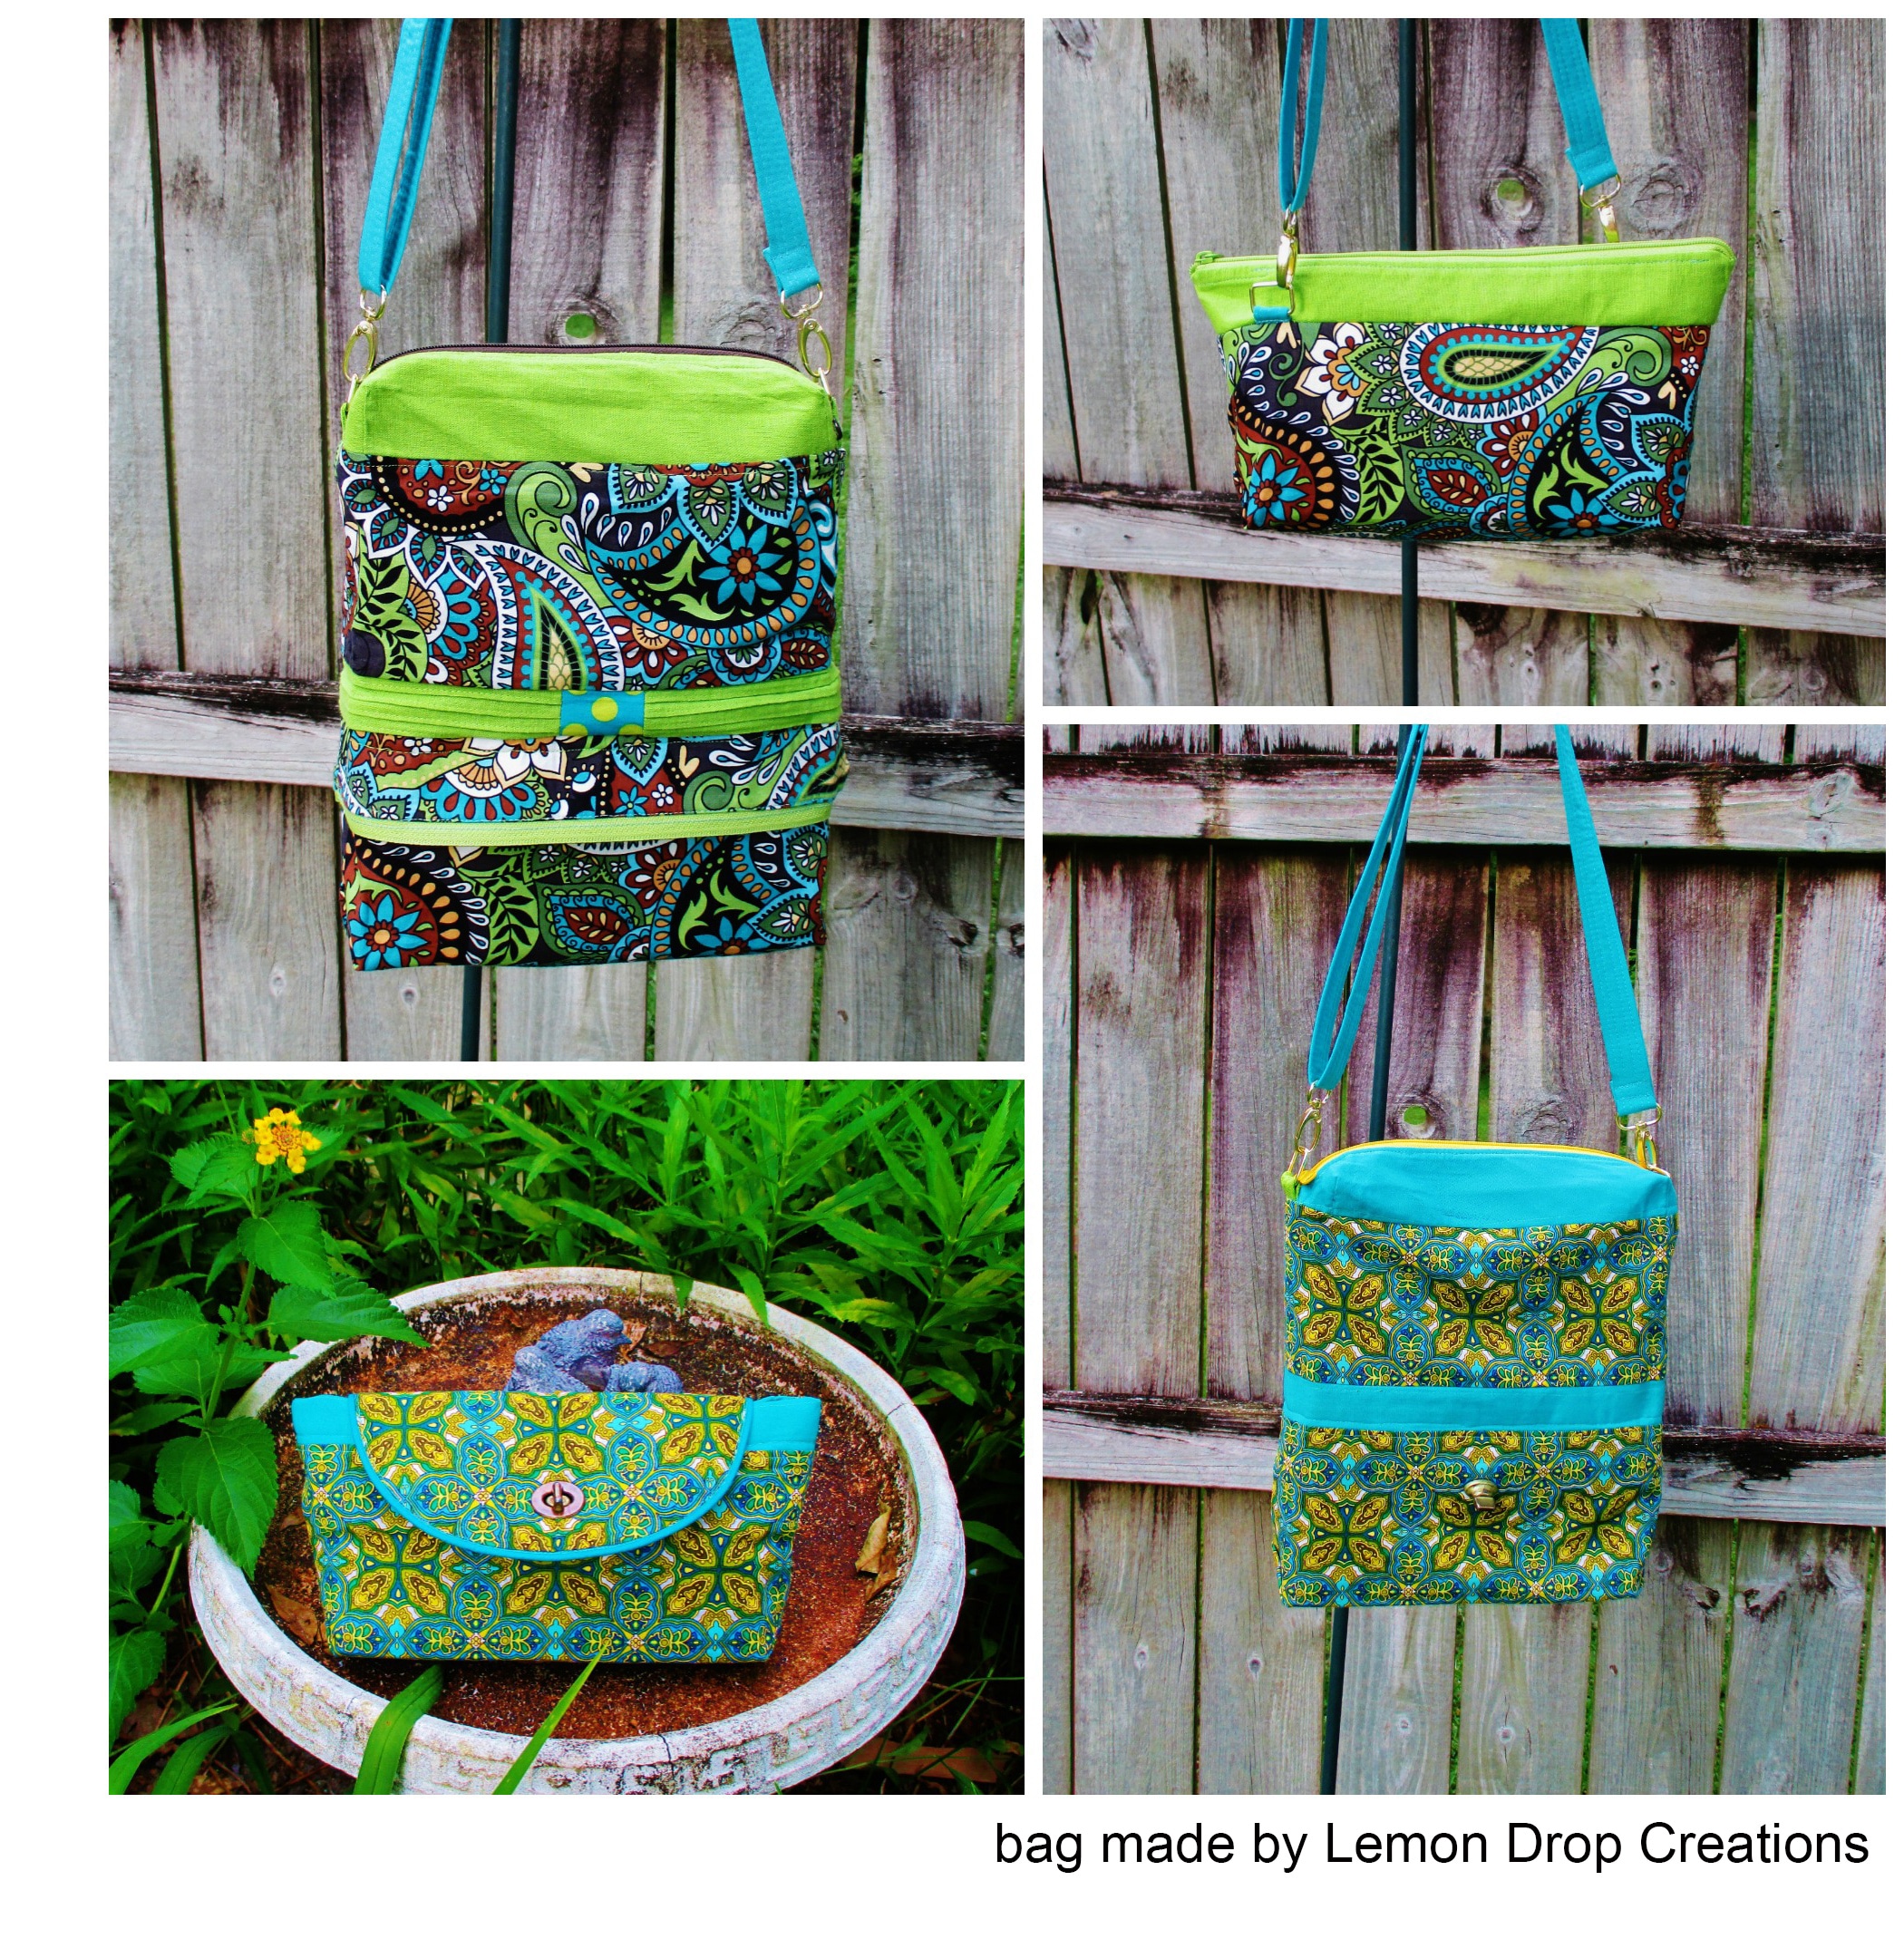 Columbine Convertible Tote Digital Sewing Pattern - Sew Daily